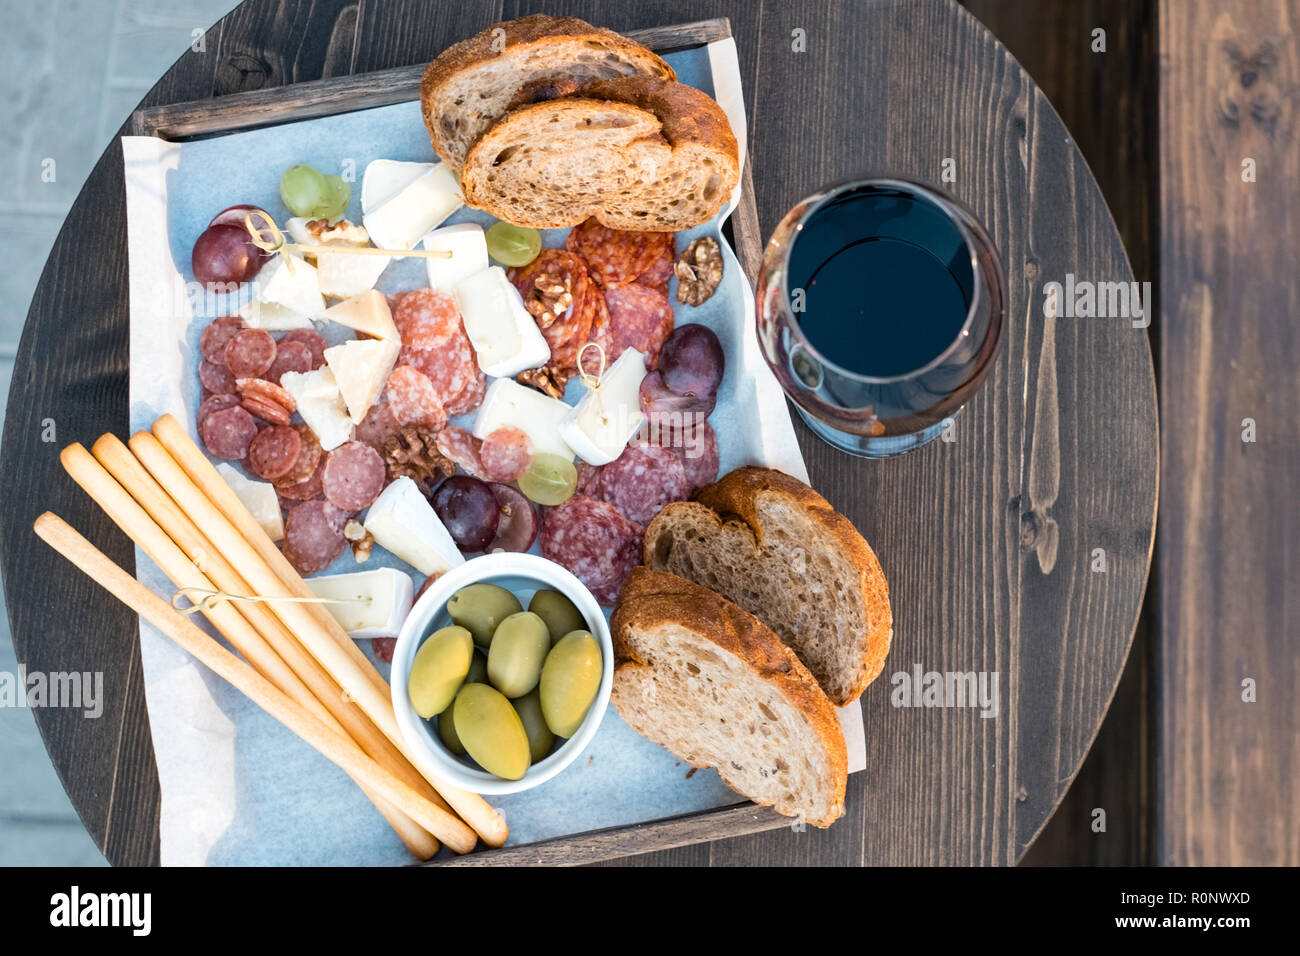 Overhead view of cheese, charcuterie, olives, grapes and bread on a table with a glass of red wine Stock Photo